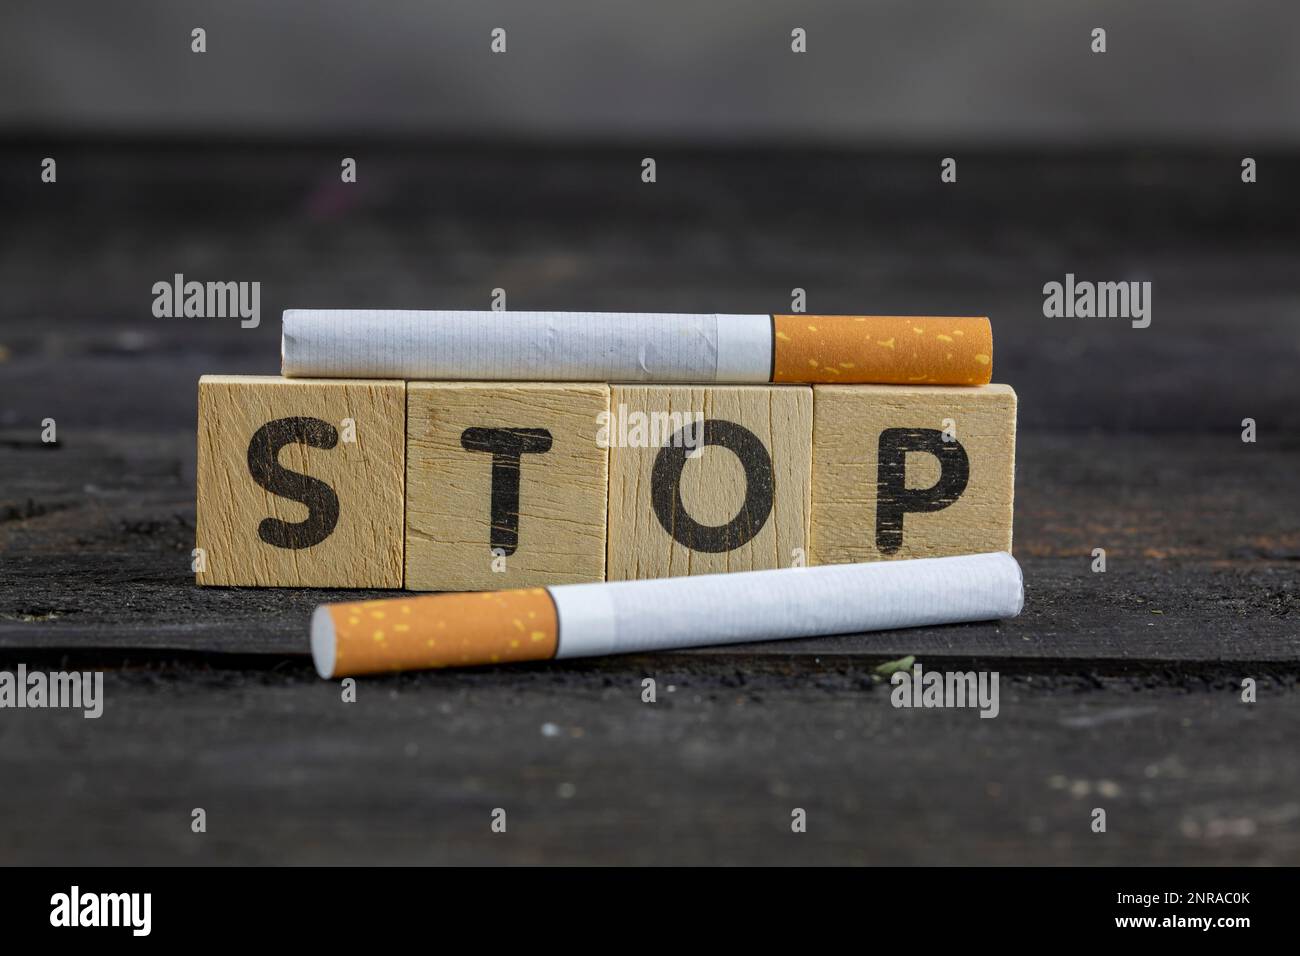 Cigarettes And Wooden Blocks Showing Stop Word On Desk Stock Photo